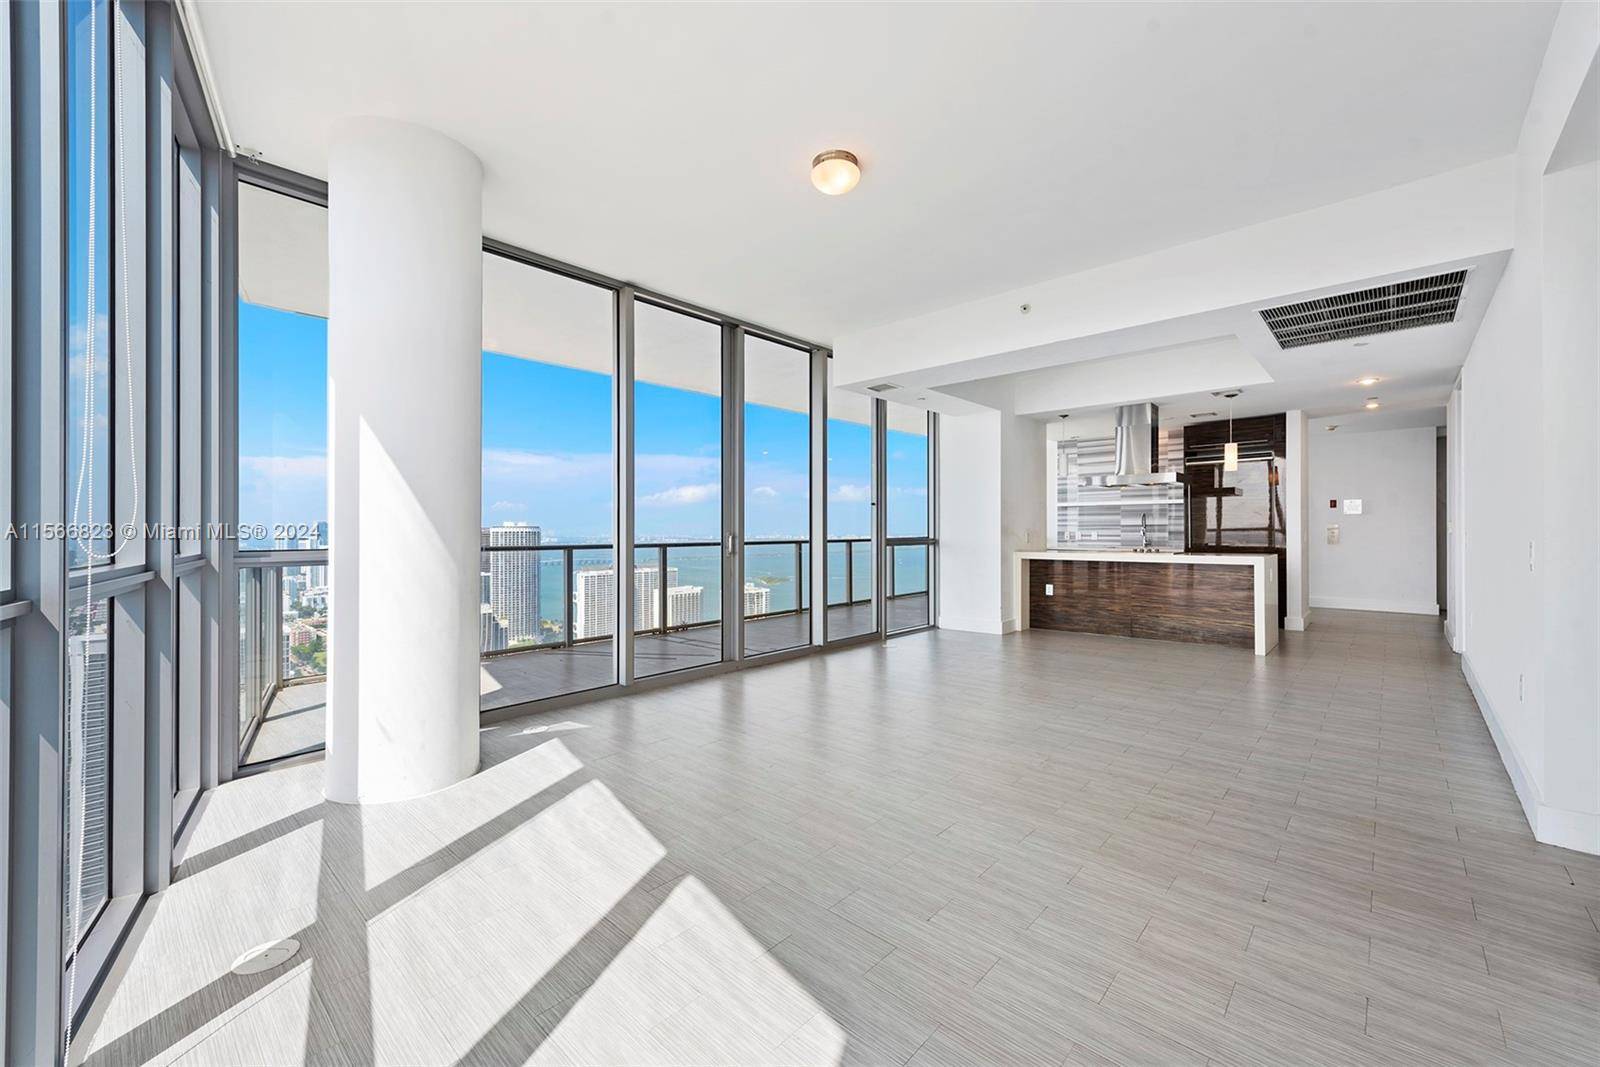 Exquisite 2 bedroom 2. 5 bath corner residence with wrap around glass walls commanding stunning views of the bay, Miami Beach, and sunsets !